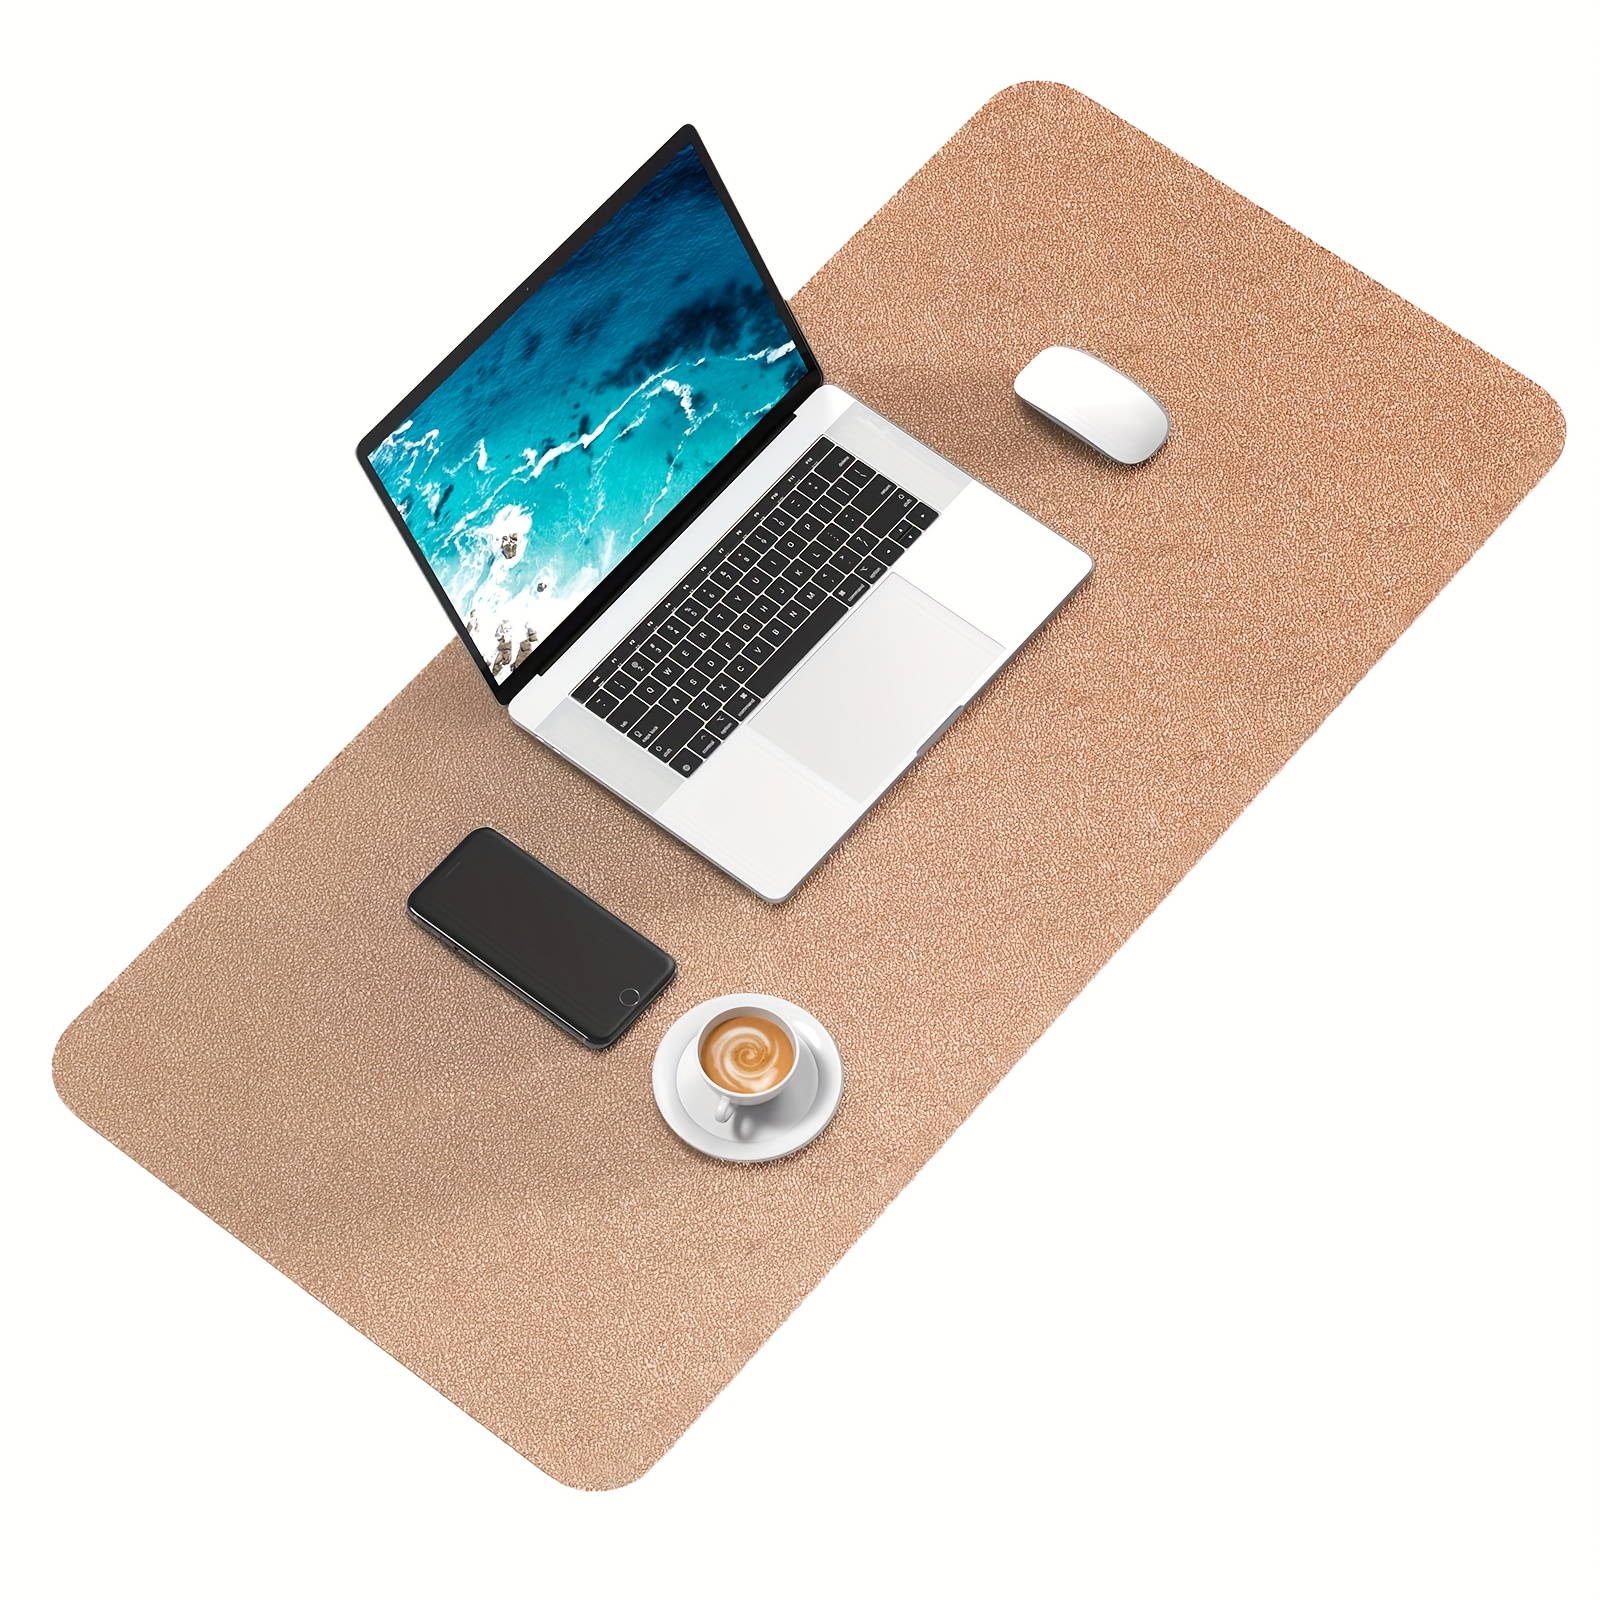  K KNODEL Desk Mat, Mouse Pad, Waterproof Mat For Desktop,  Leather Pad Keyboard And Mouse, Protector Office Home